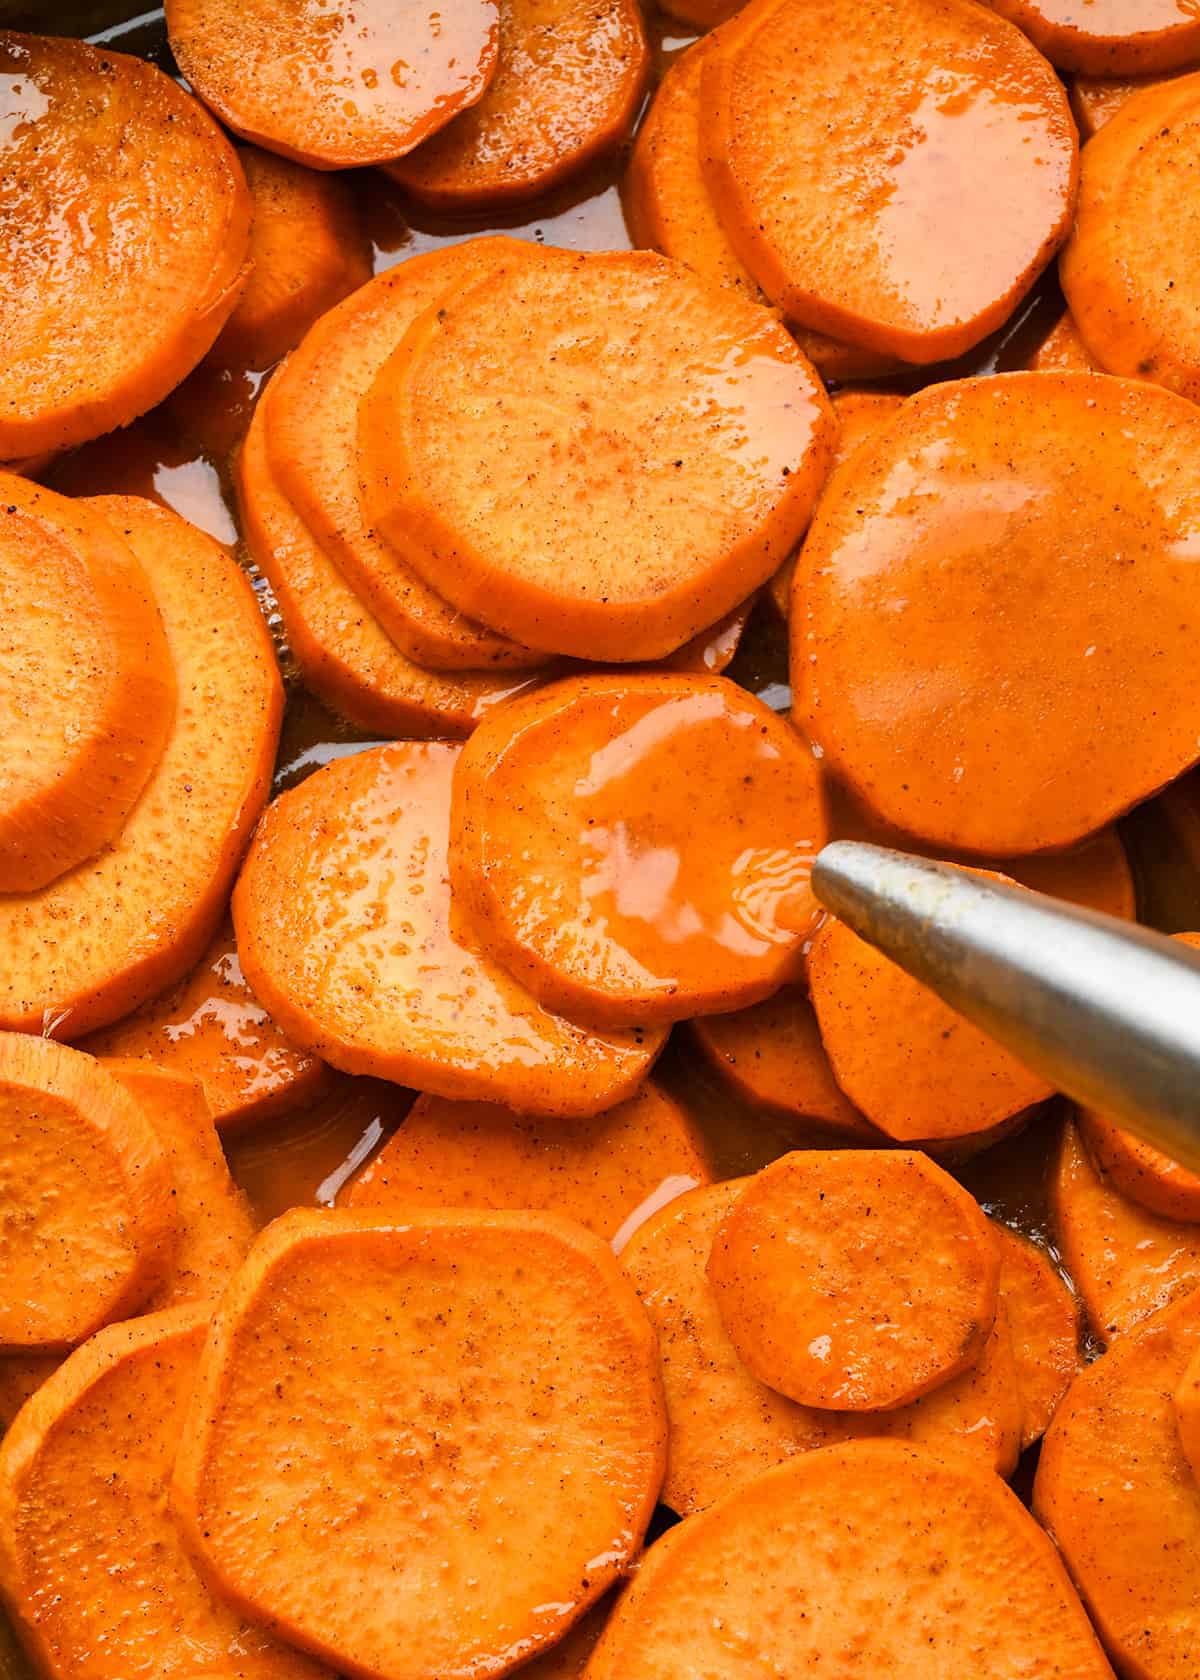 How to Make Candied Yams - basting partially baked yams with the sauce